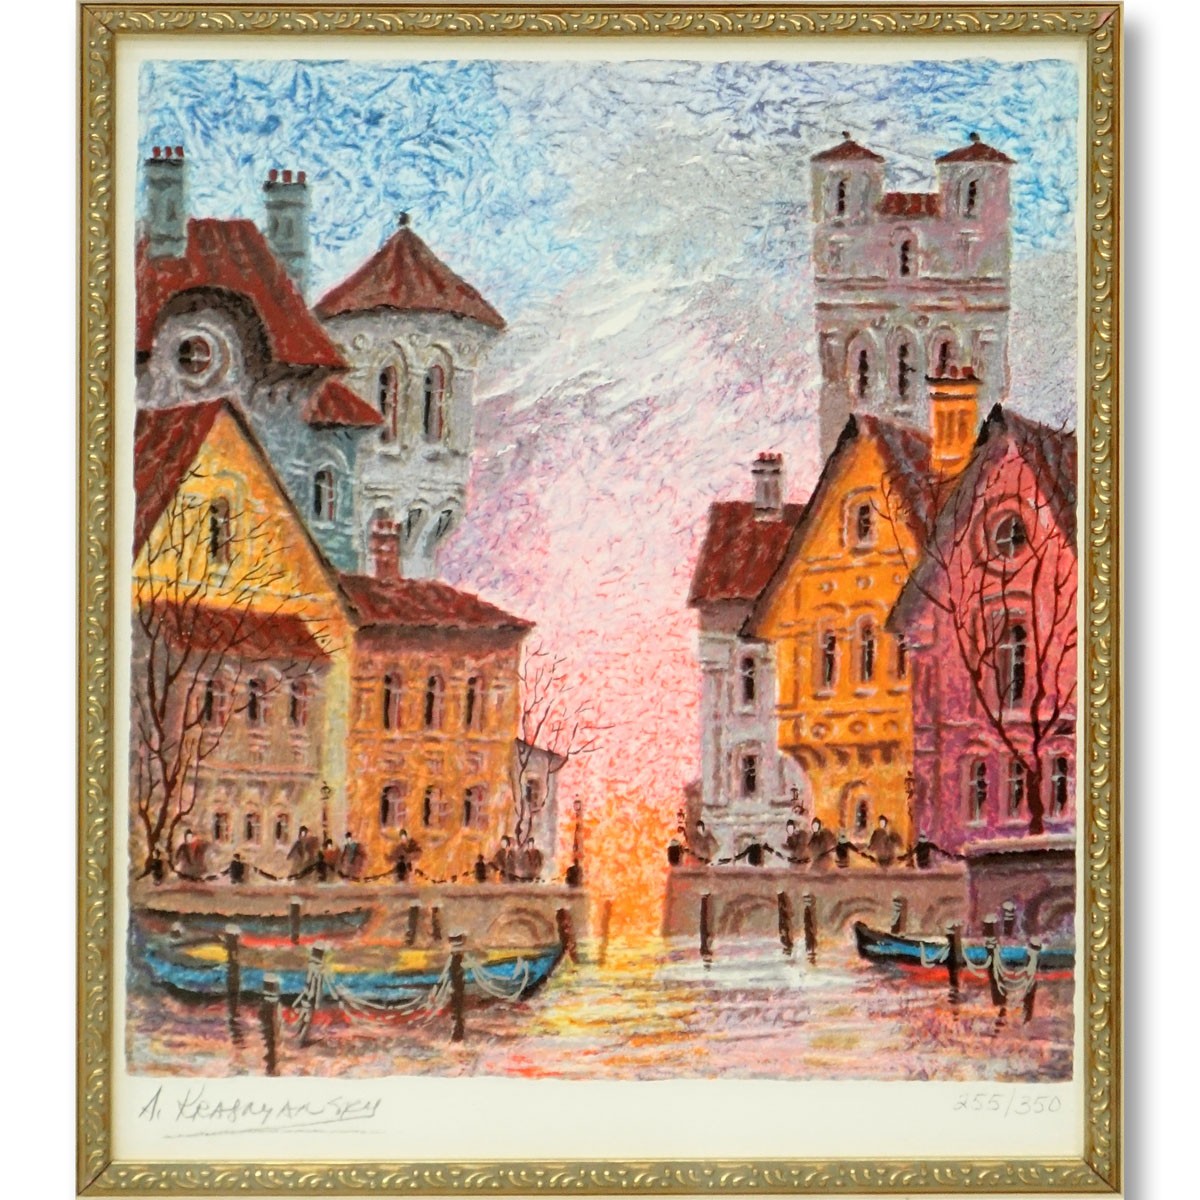 Anatol Krasnyansky, Ukrainian (born 1930) Serigraph in Color on Wove Paper, Gdansk near Harbor, Signed and Numbered 255/350. Good condition.